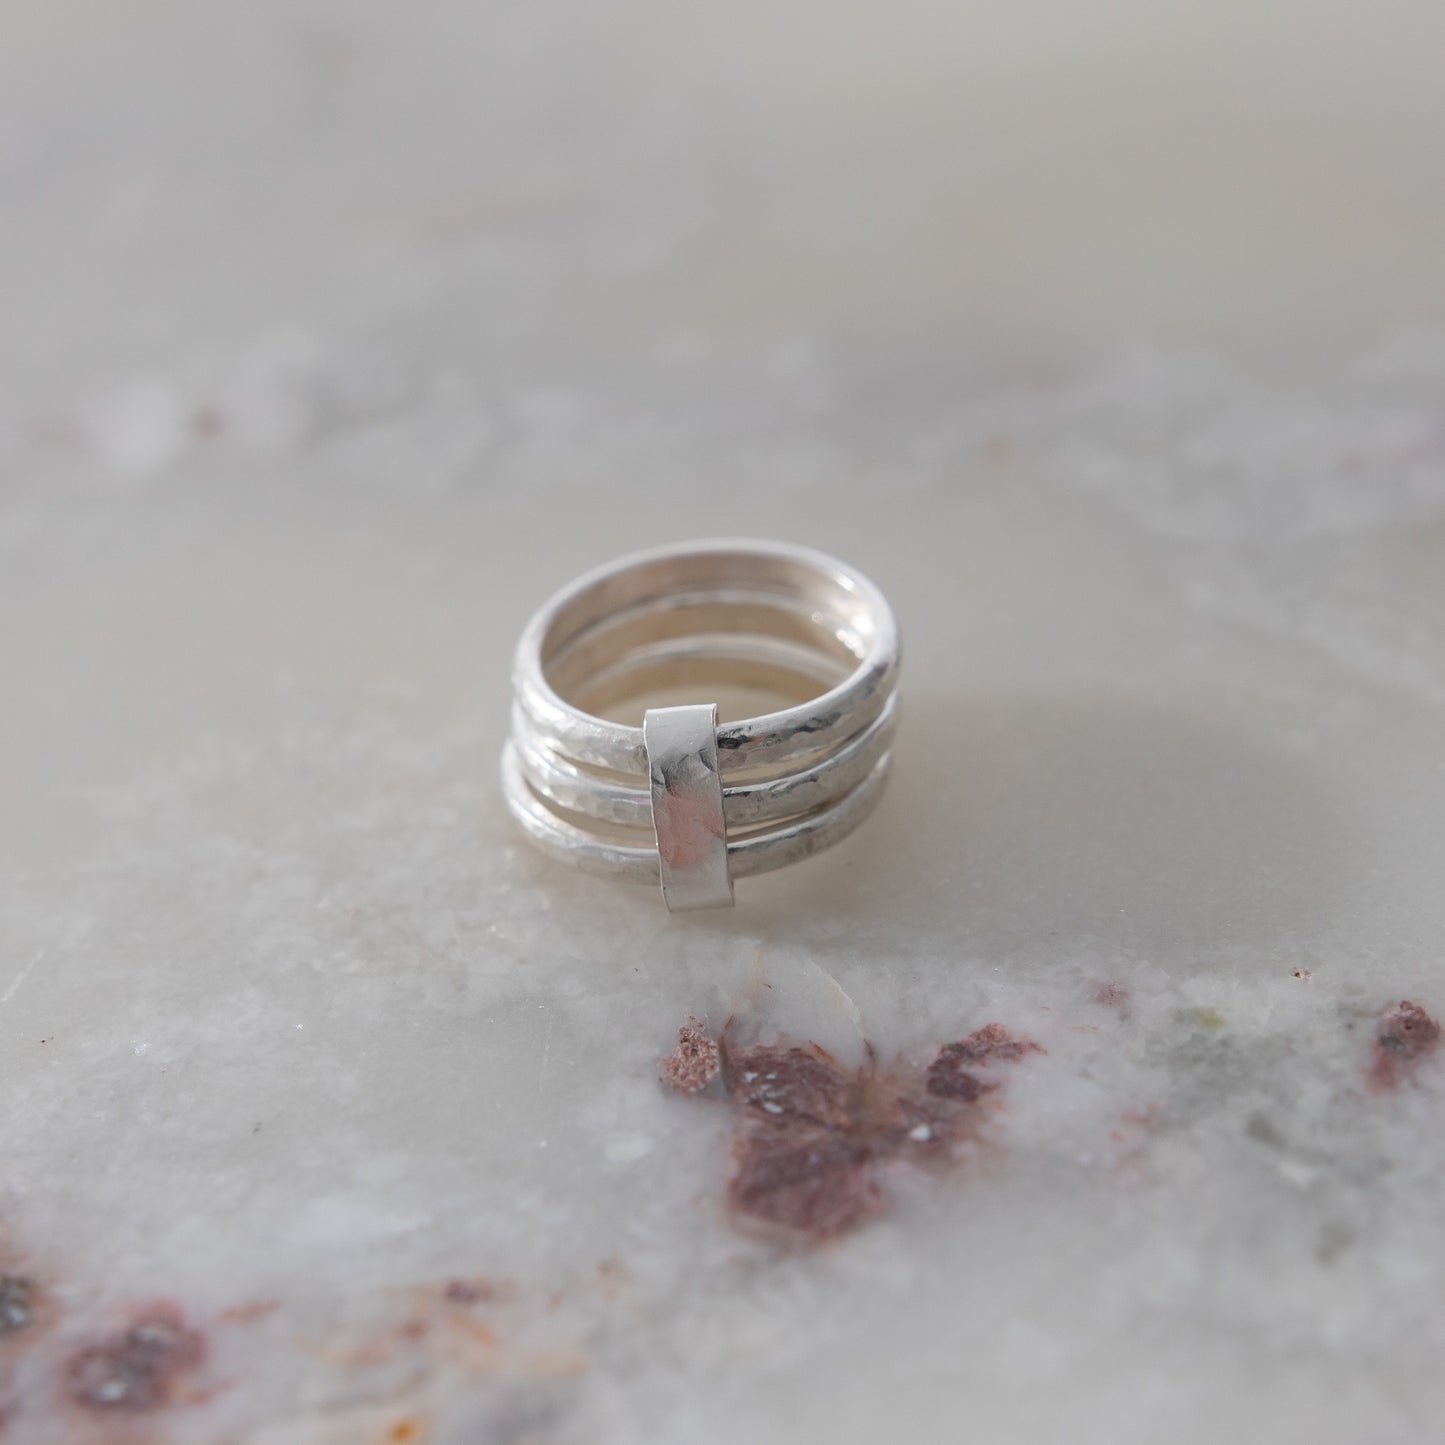 The Silver Stack Ring